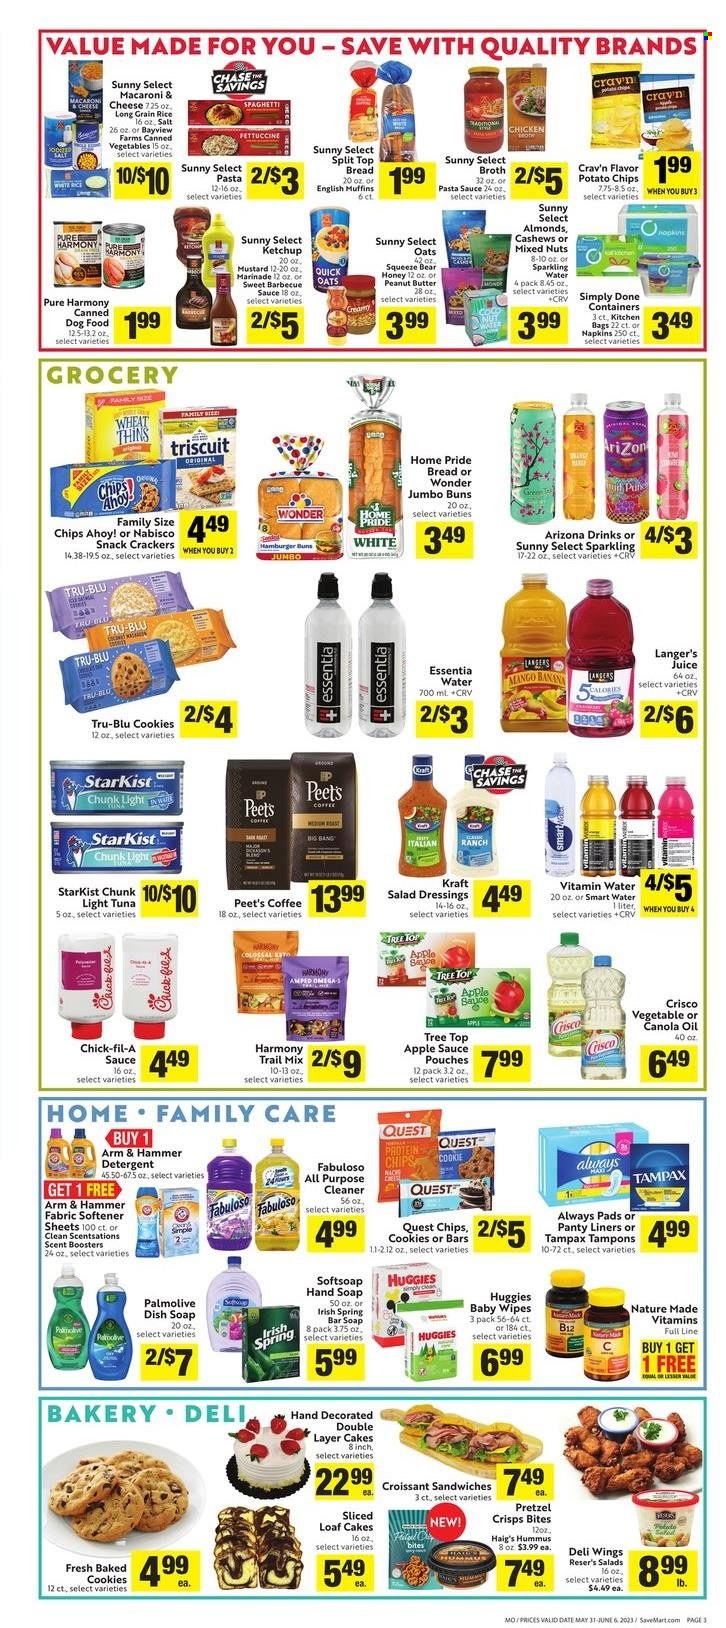 thumbnail - Save Mart Flyer - 05/31/2023 - 06/06/2023 - Sales products - bread, english muffins, cake, croissant, buns, burger buns, mango, chicken, StarKist, macaroni & cheese, spaghetti, pasta sauce, sauce, Kraft®, snack, cookies, crackers, Chips Ahoy!, Nabisco, potato chips, Thins, pretzel crisps, ARM & HAMMER, Crisco, oats, broth, canned vegetables, light tuna, Quick Oats, rice, white rice, long grain rice, BBQ sauce, mustard, salad dressing, ketchup, marinade, canola oil, apple sauce, peanut butter, almonds, cashews, mixed nuts, trail mix, juice, AriZona, sparkling water, Smartwater, vitamin water, water, coffee, wipes, Huggies, baby wipes, napkins, fabric softener, Fabuloso, scent booster, Softsoap, hand soap, Palmolive, soap bar, animal food, dog food, Pure Harmony, Nature Made, Omega-3, dietary supplement. Page 3.